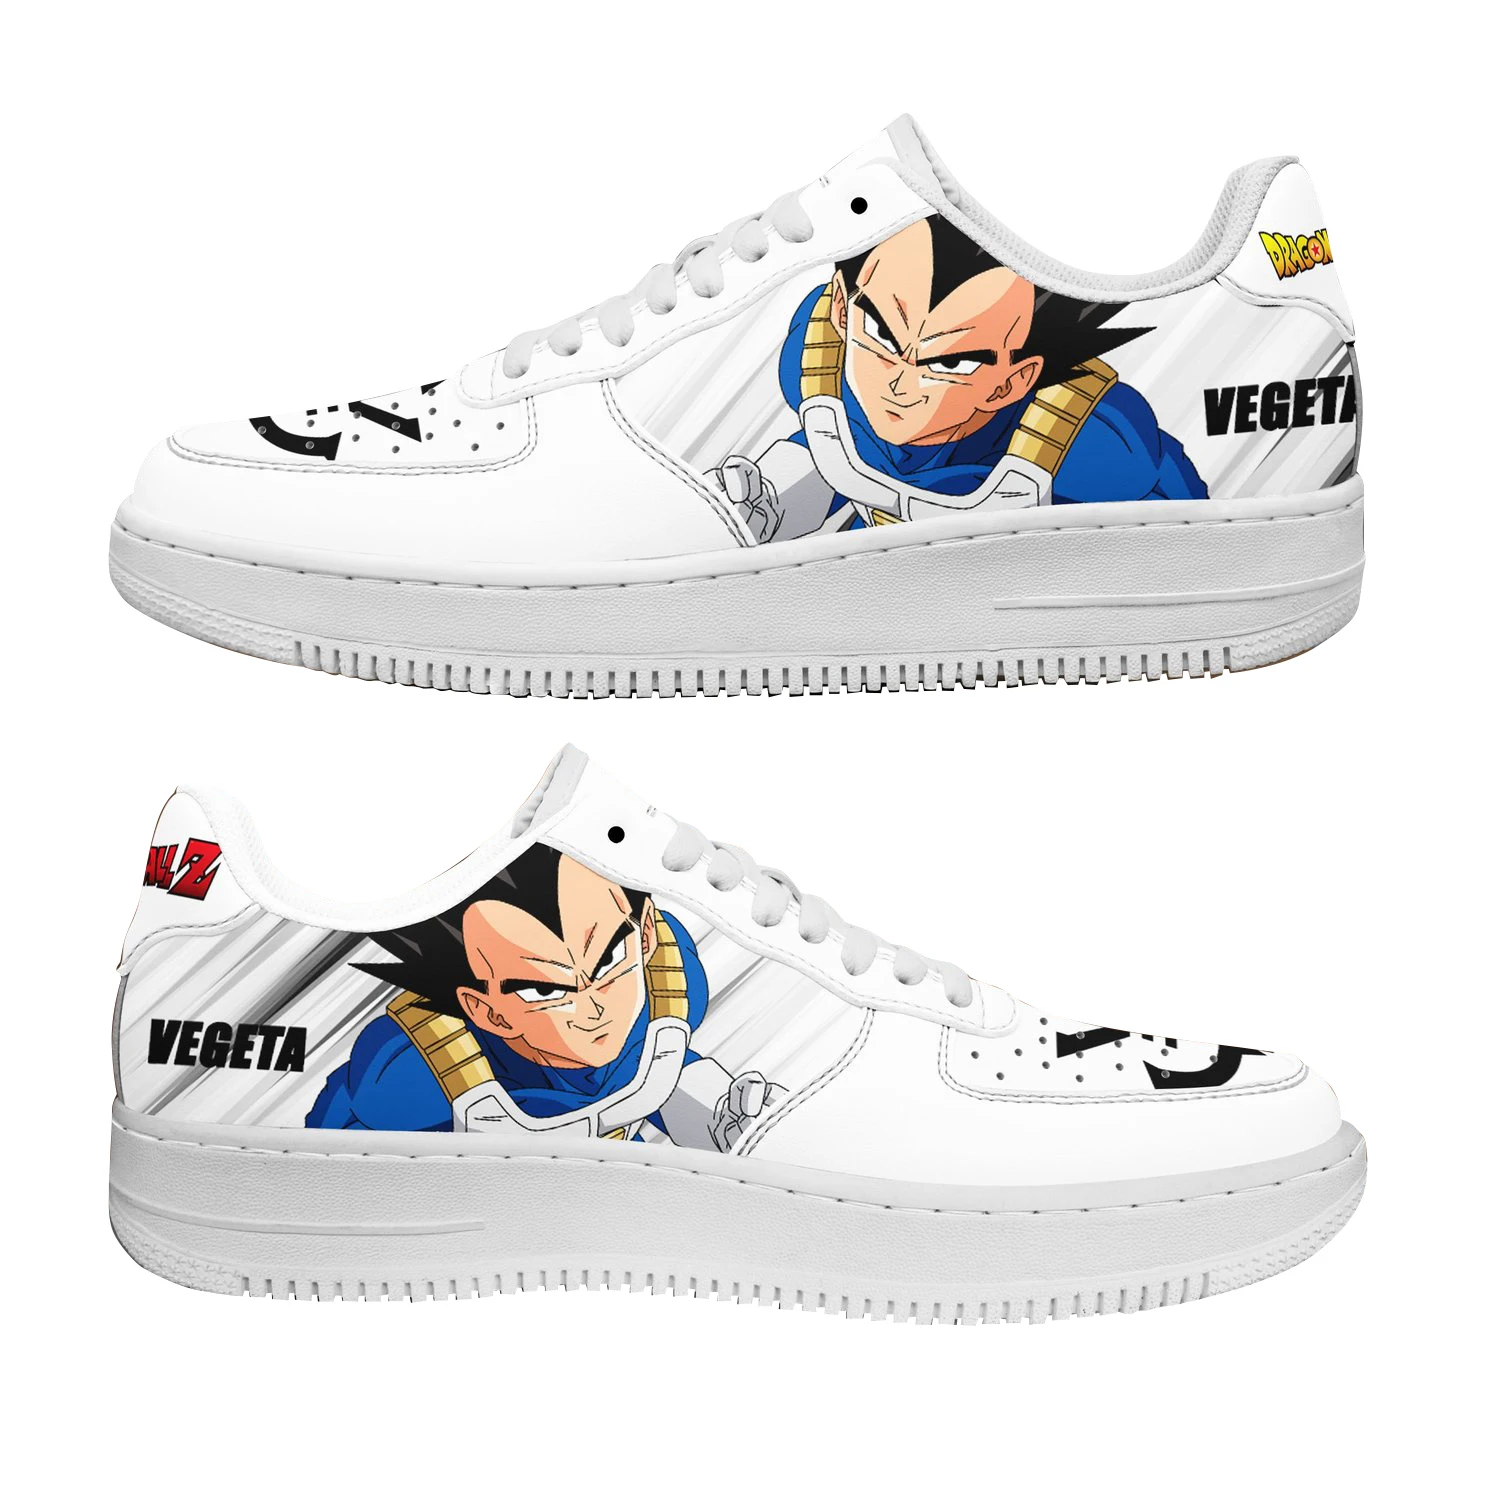 Diy Anime Fan Sneakers Sneakers Custom Ball Z Anime Shoes - Buy Af Shoes Dragon Ball,Dbz Dbz Shoes Dragon Ball Vegeta,Custom Anime Shoes Sneakers Boots Air Shoes on